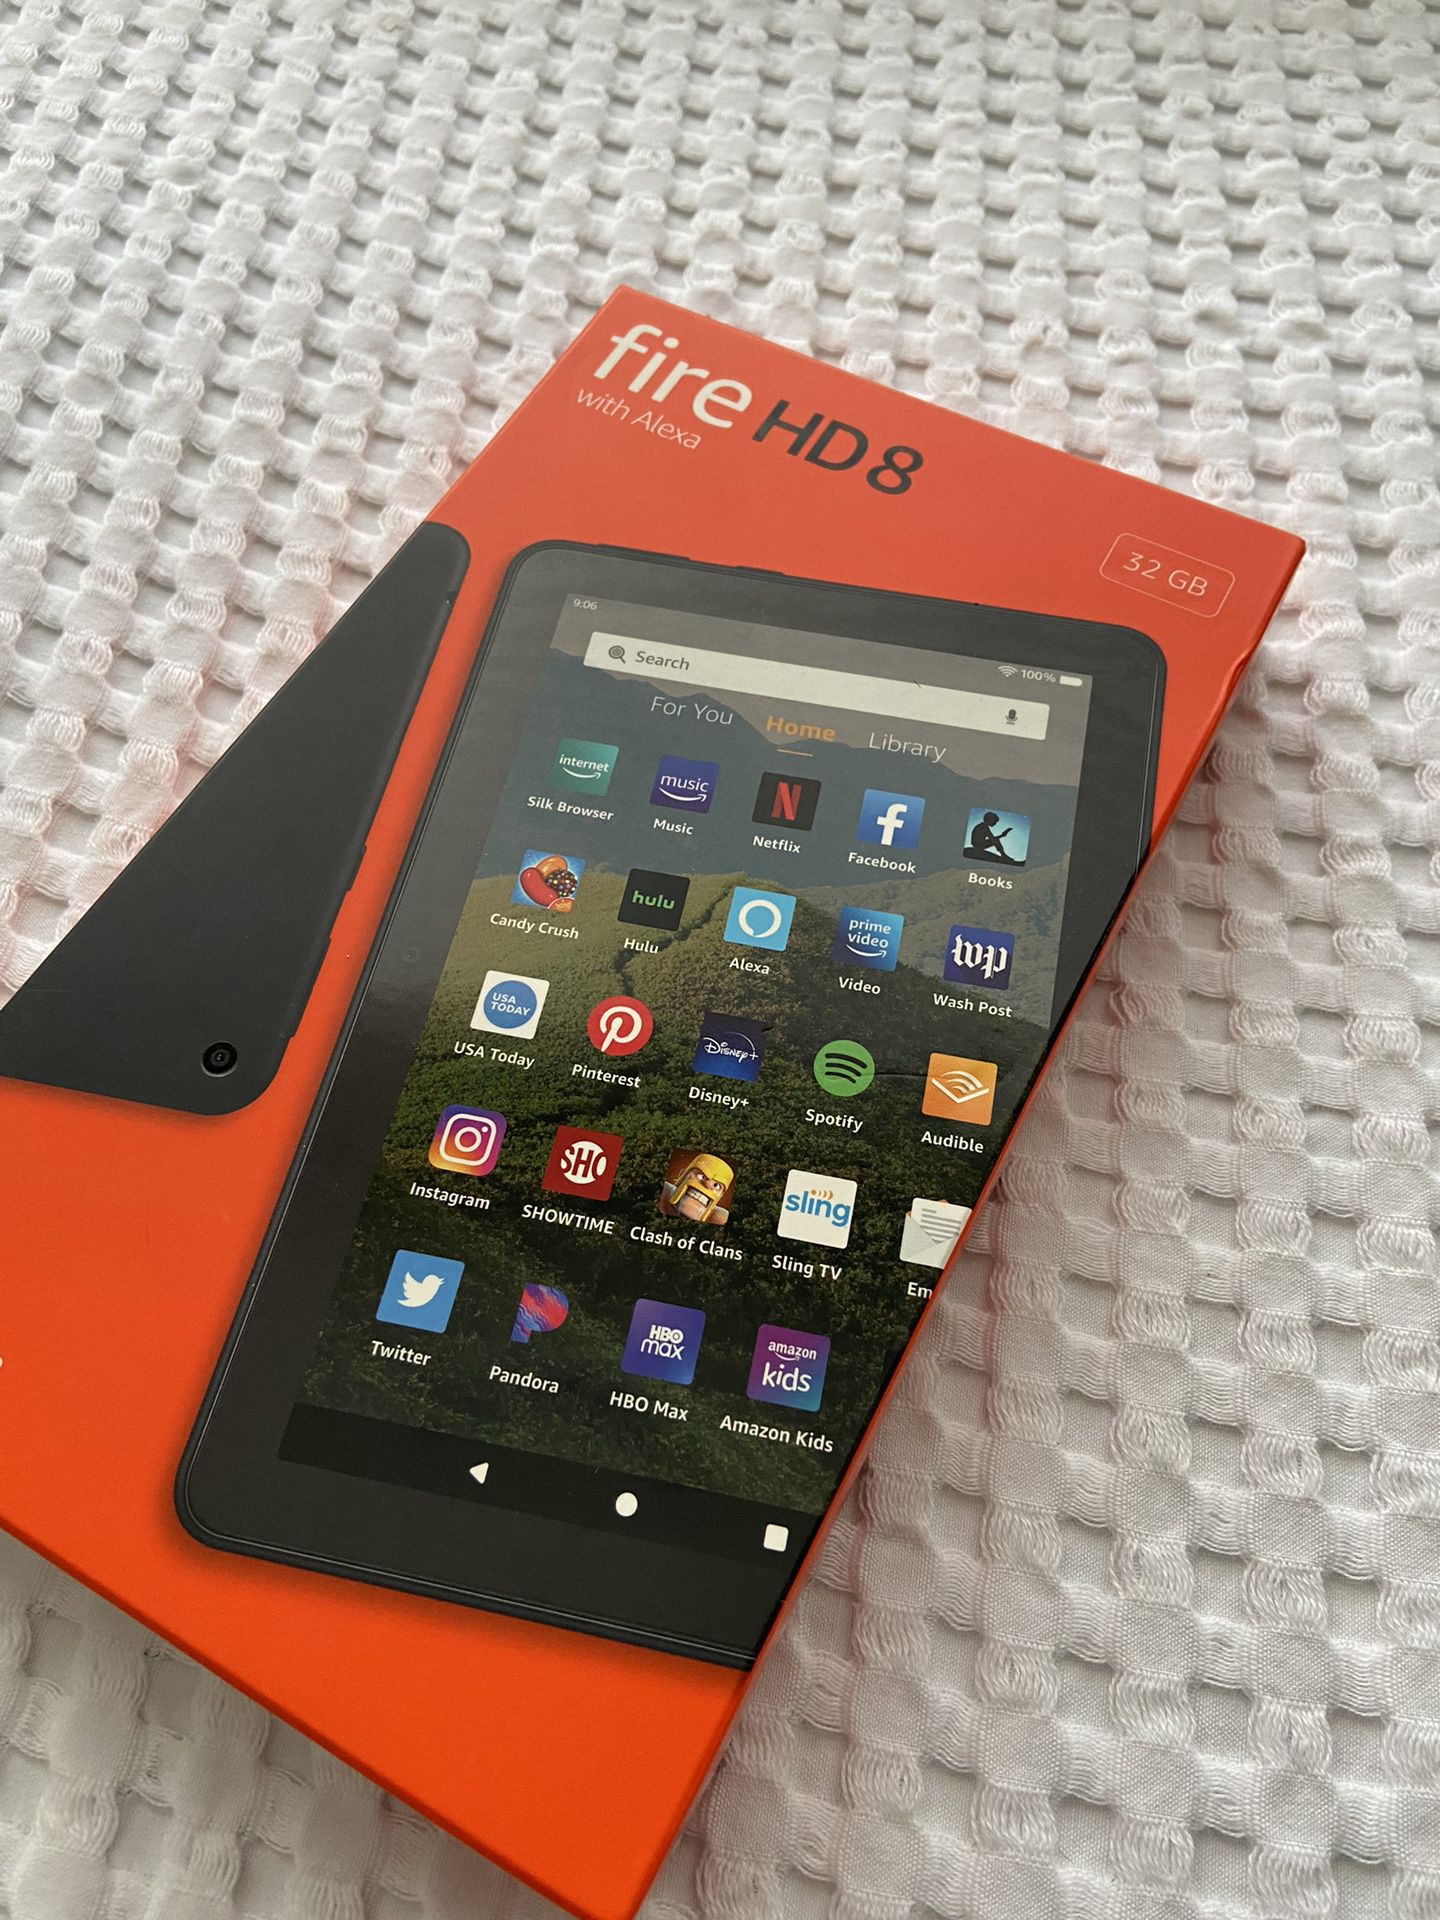 Kindle Fire HD 8 Tablet, Brand New/Unopened